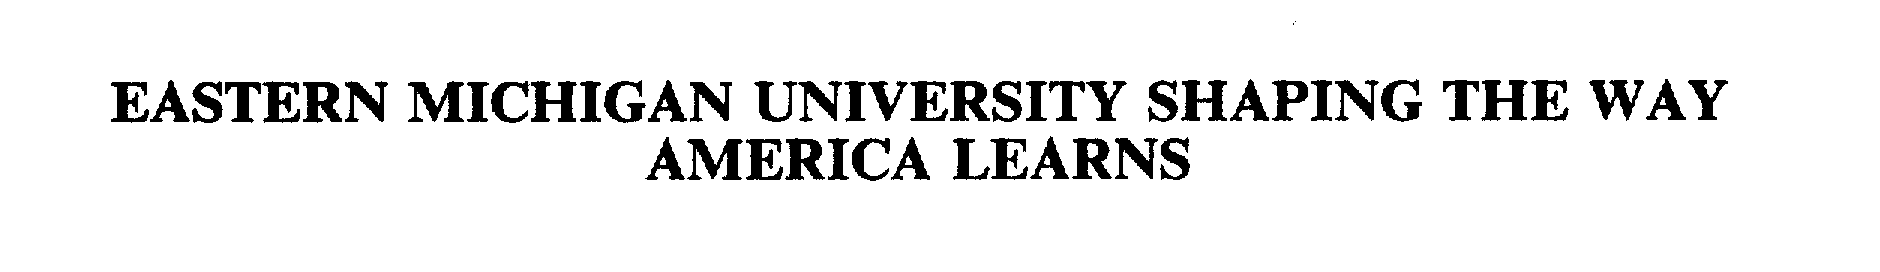  EASTERN MICHIGAN UNIVERSITY SHAPING THE WAY AMERICA LEARNS